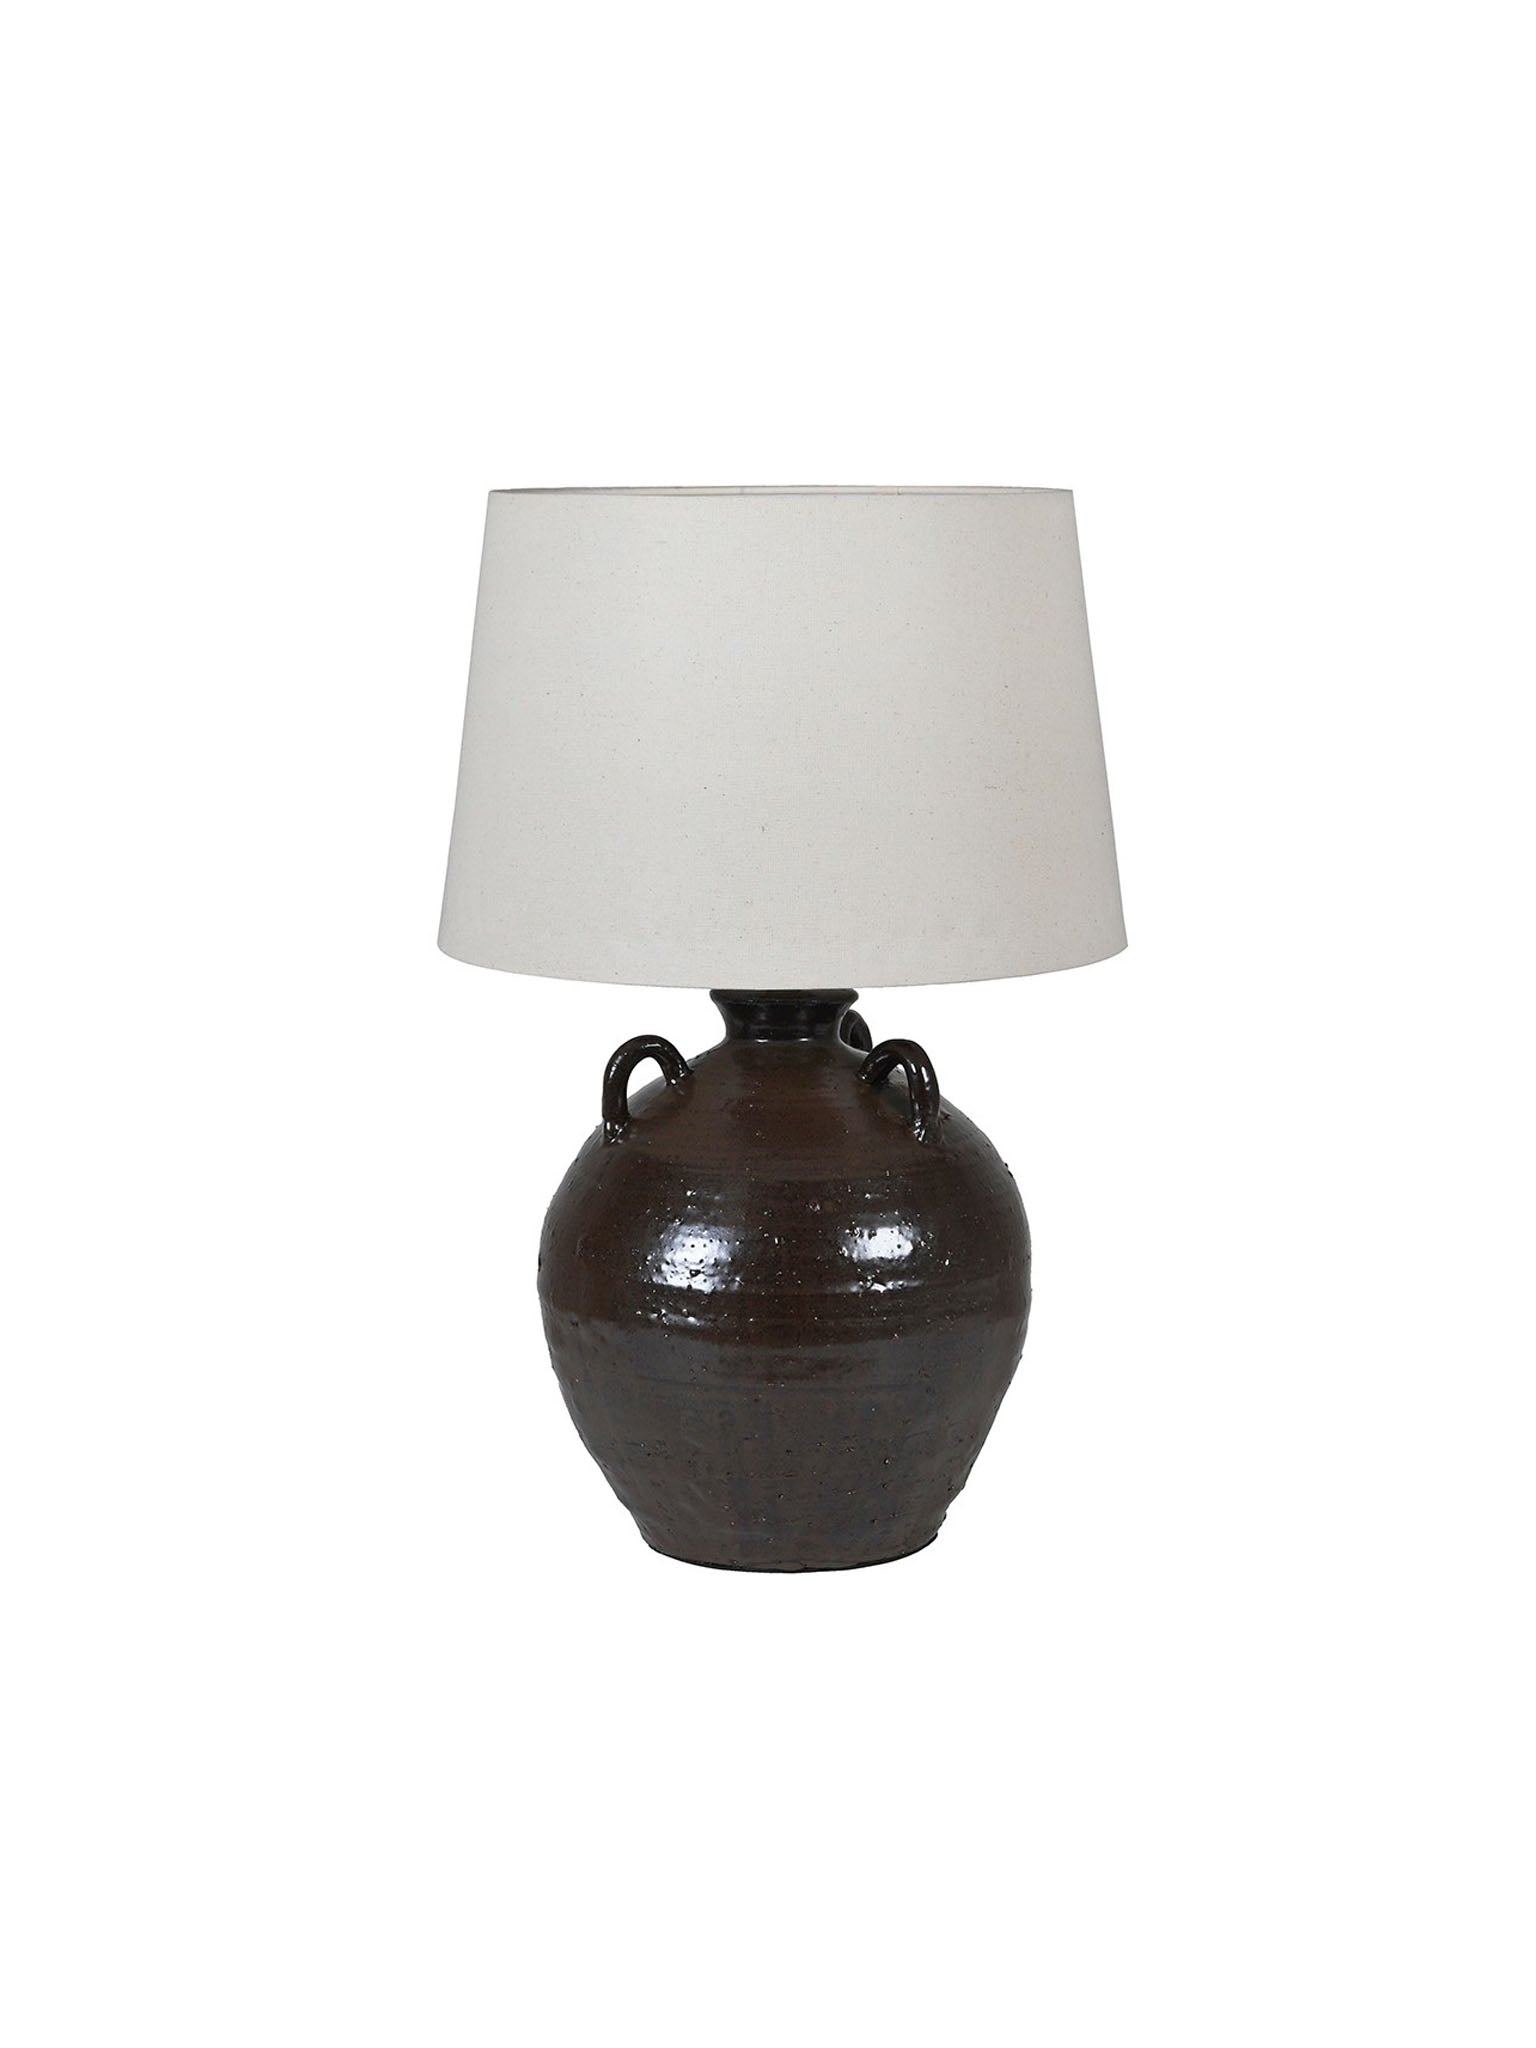 black table lamp with handles and a white shade